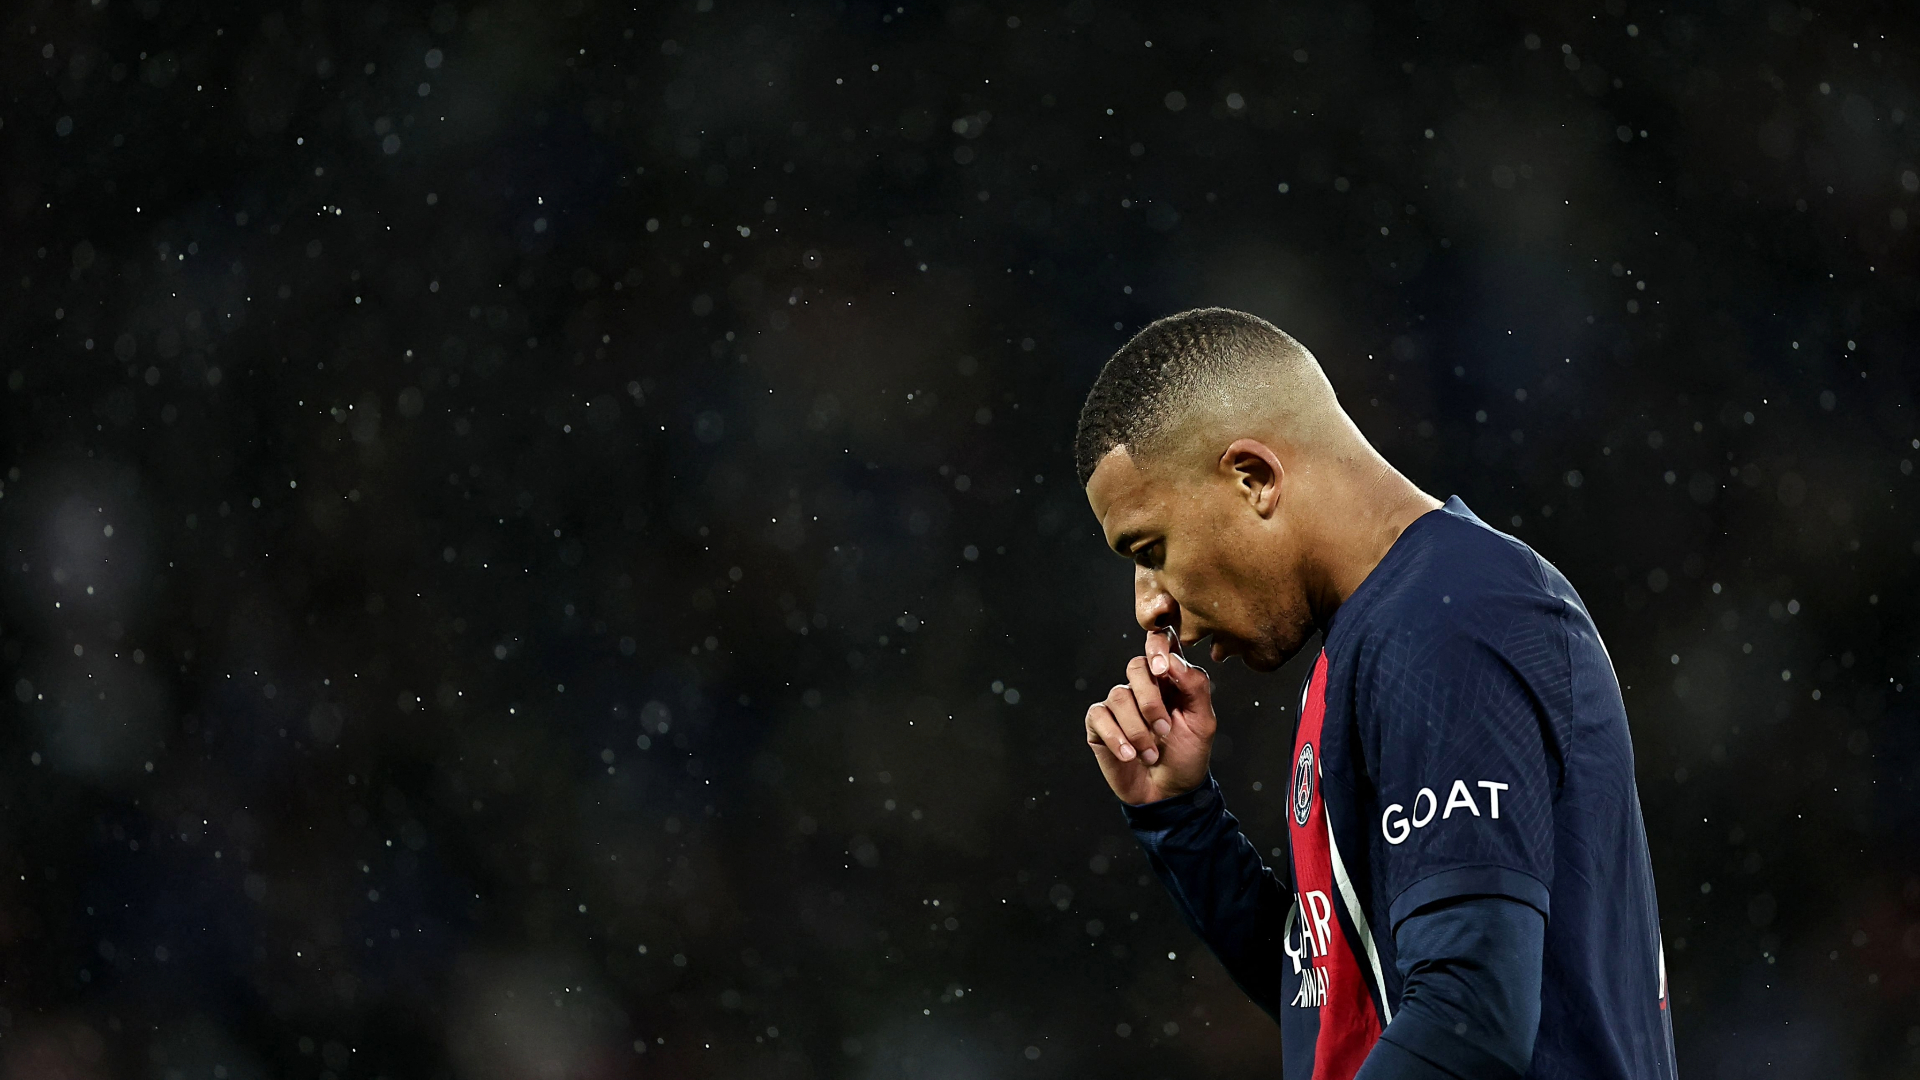 Kylian Mbappé and Kang-in Lee Battle Out for Top PSG Jersey Sales